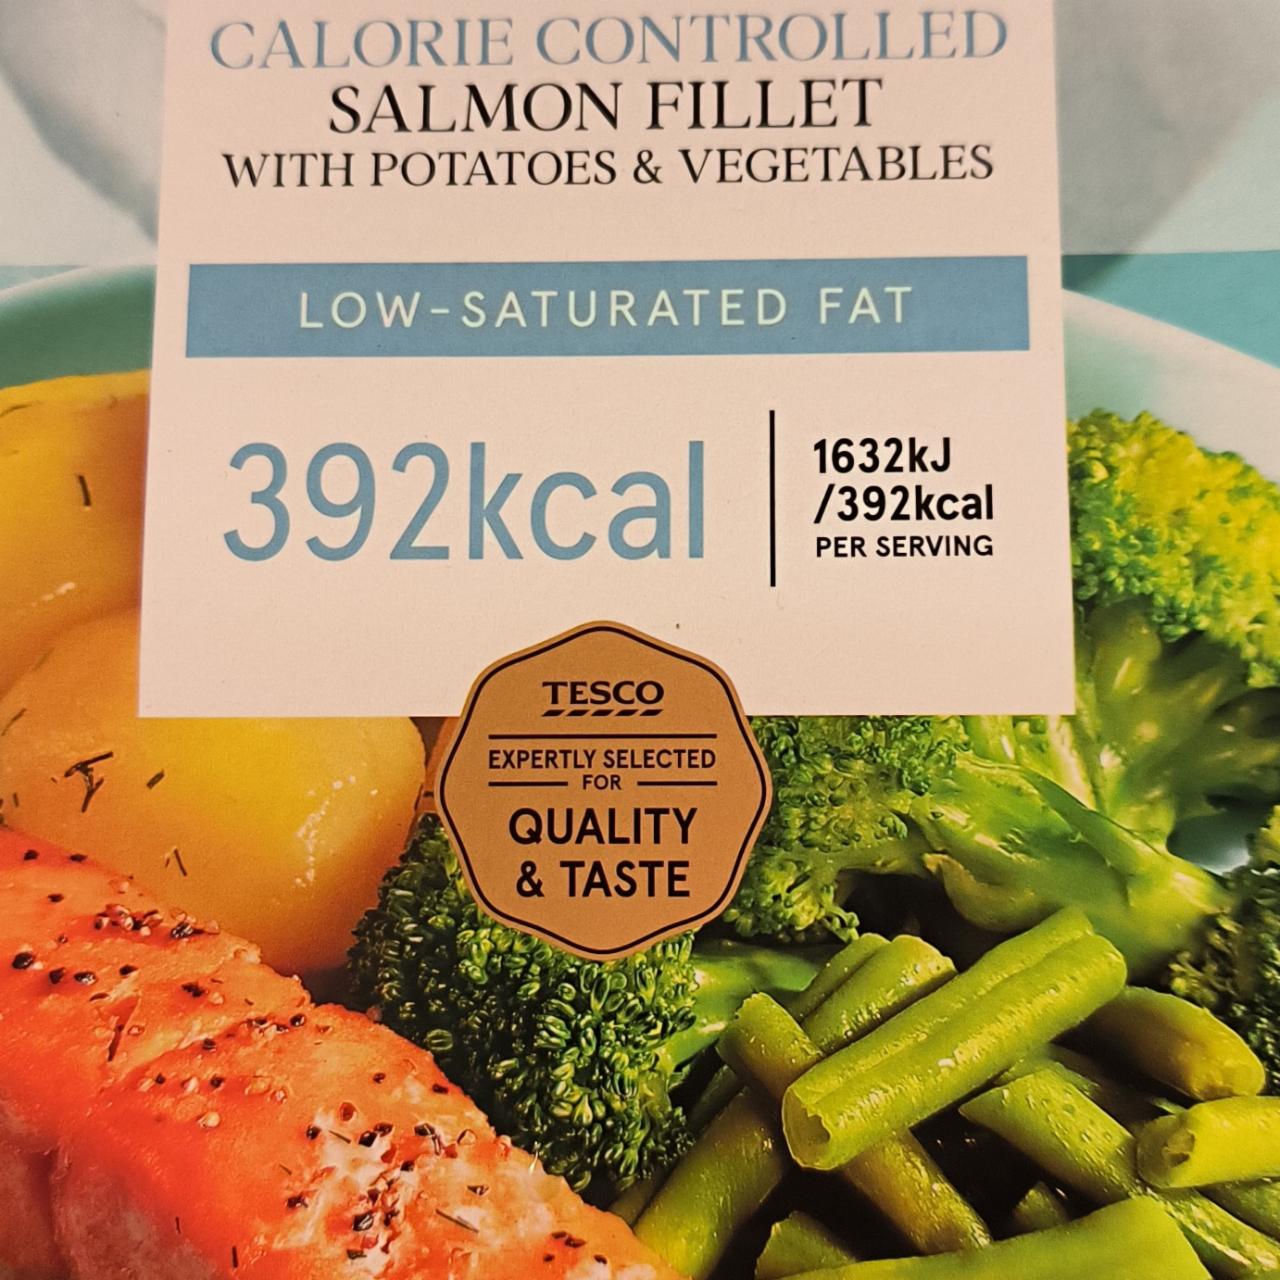 Fotografie - Calorie controlled Salmon Fillet with Potatoes & Vegetables Tesco